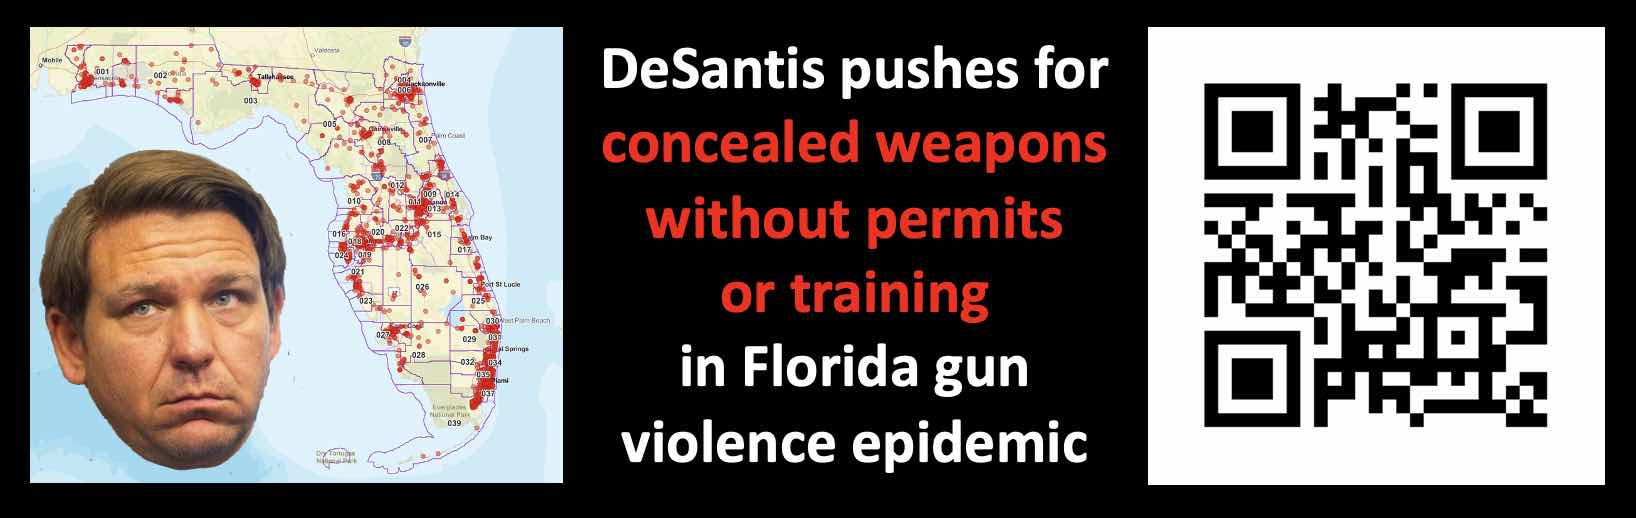 DeSantis pushes for concealed weapons without permits or training